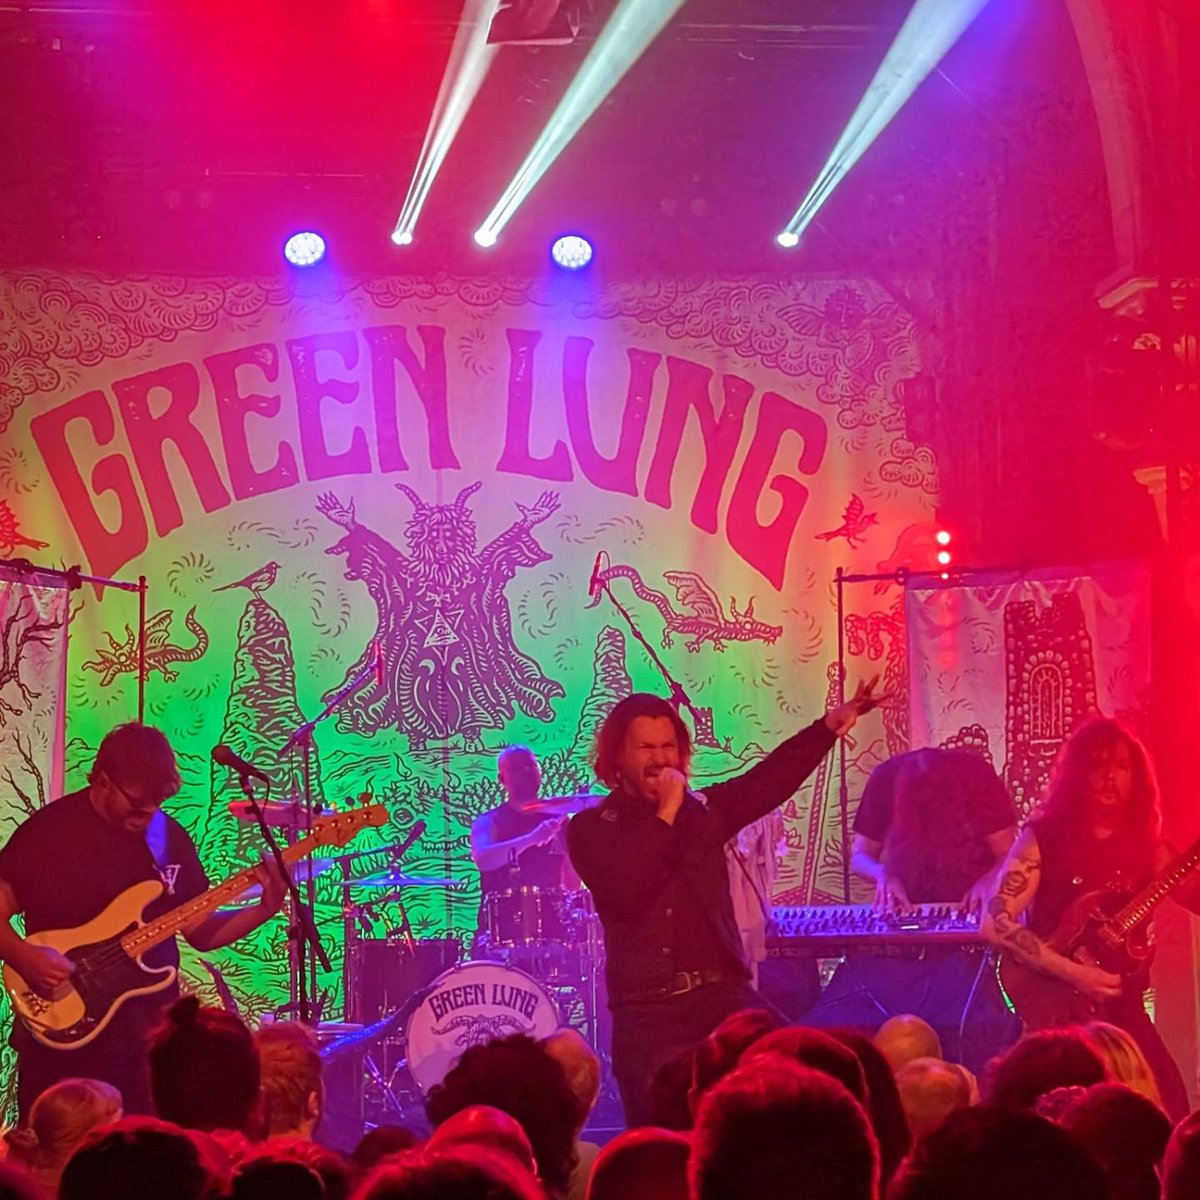 Wow, @greenlungband were utterly outstanding last night, a gig for the memories. Special band! #greenlung #metaltwitter